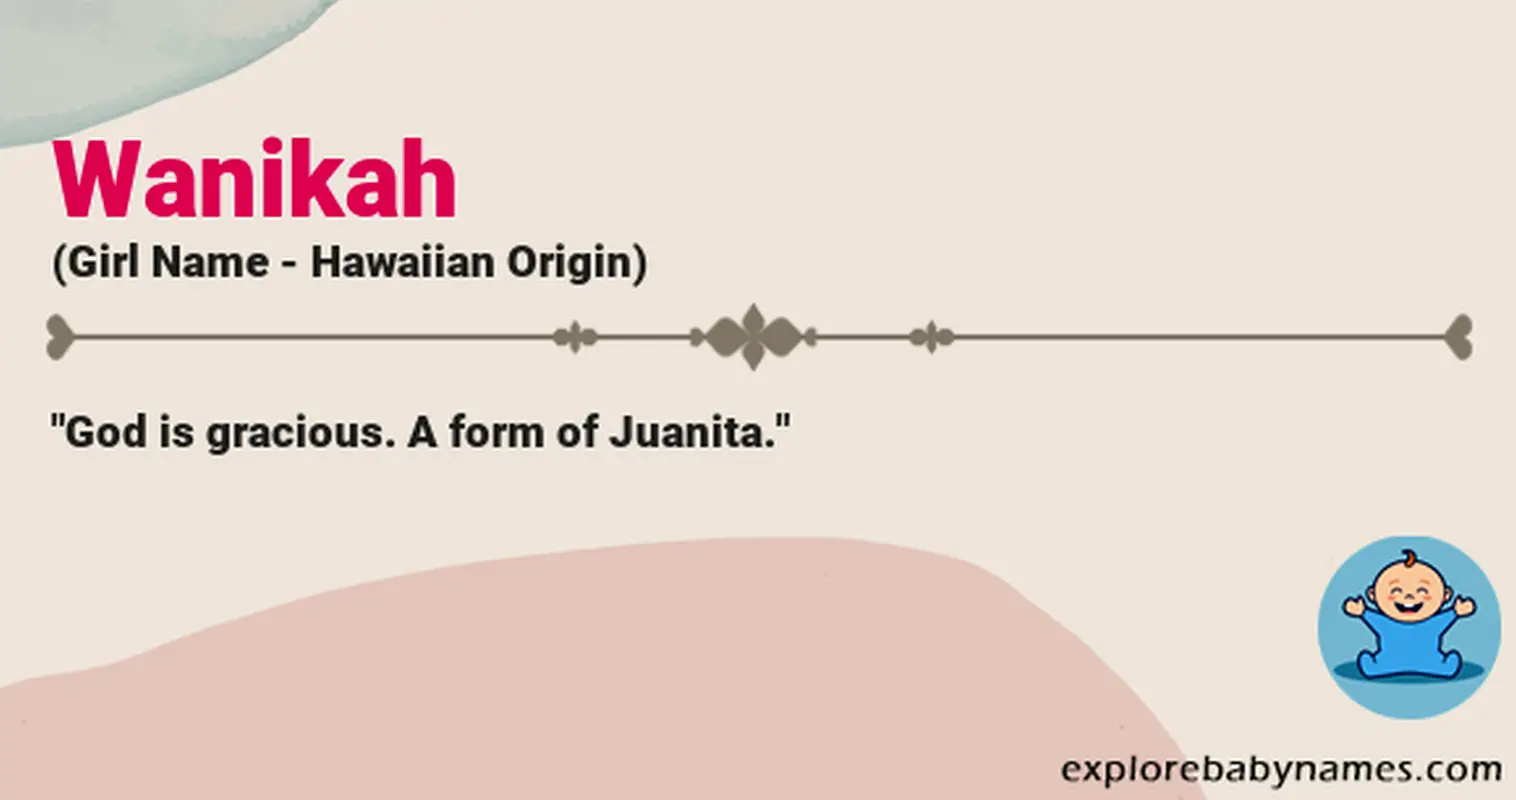 Meaning of Wanikah